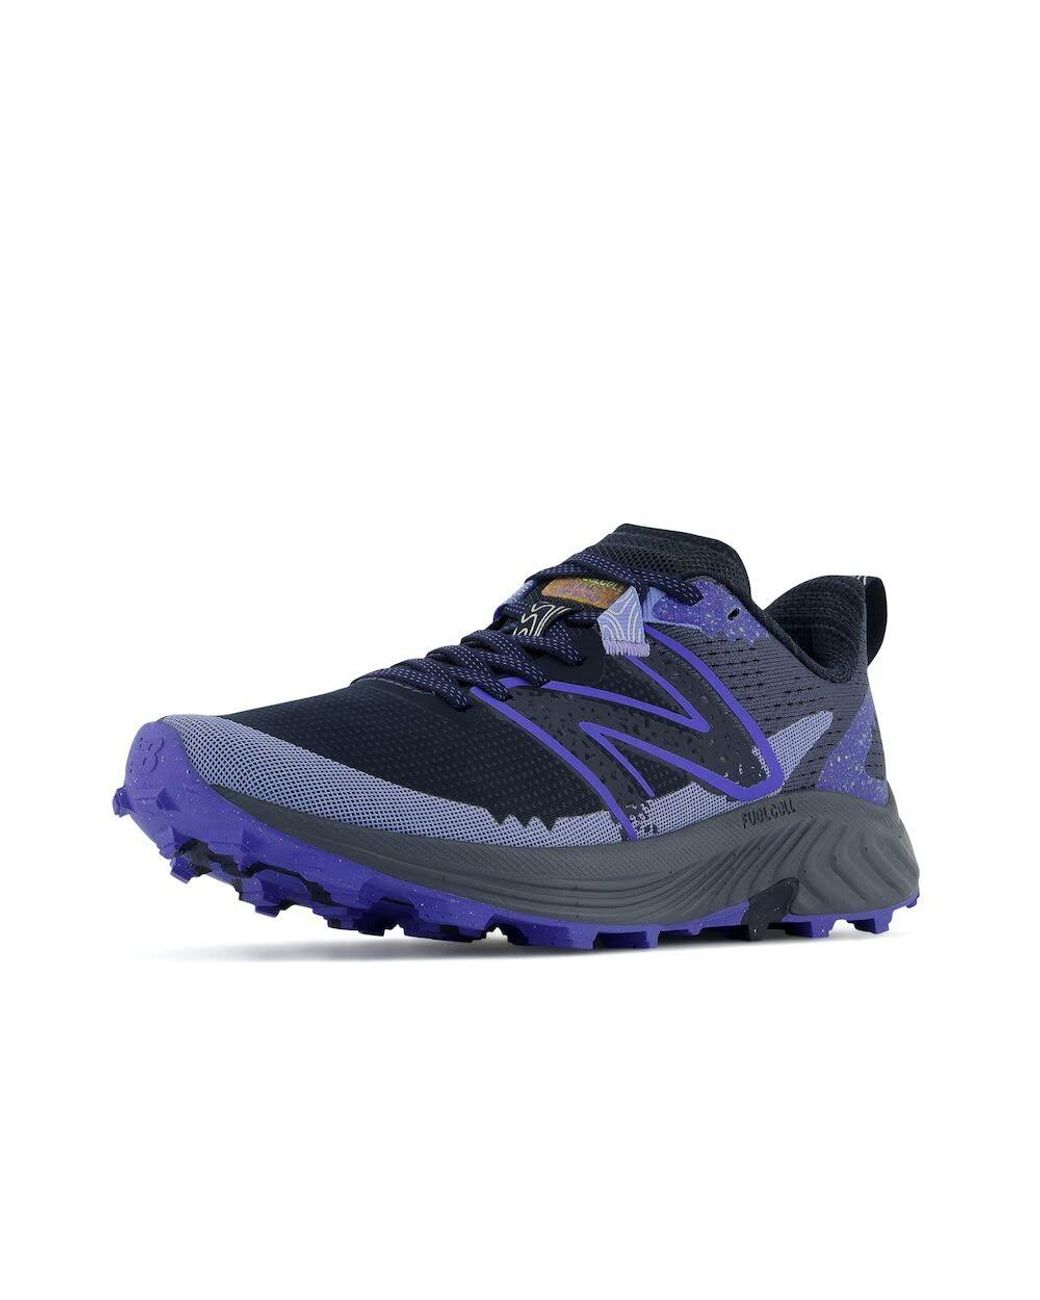 New Balance Rubber Fuelcell Summit Unknown V3 Trail Running Shoe in ...